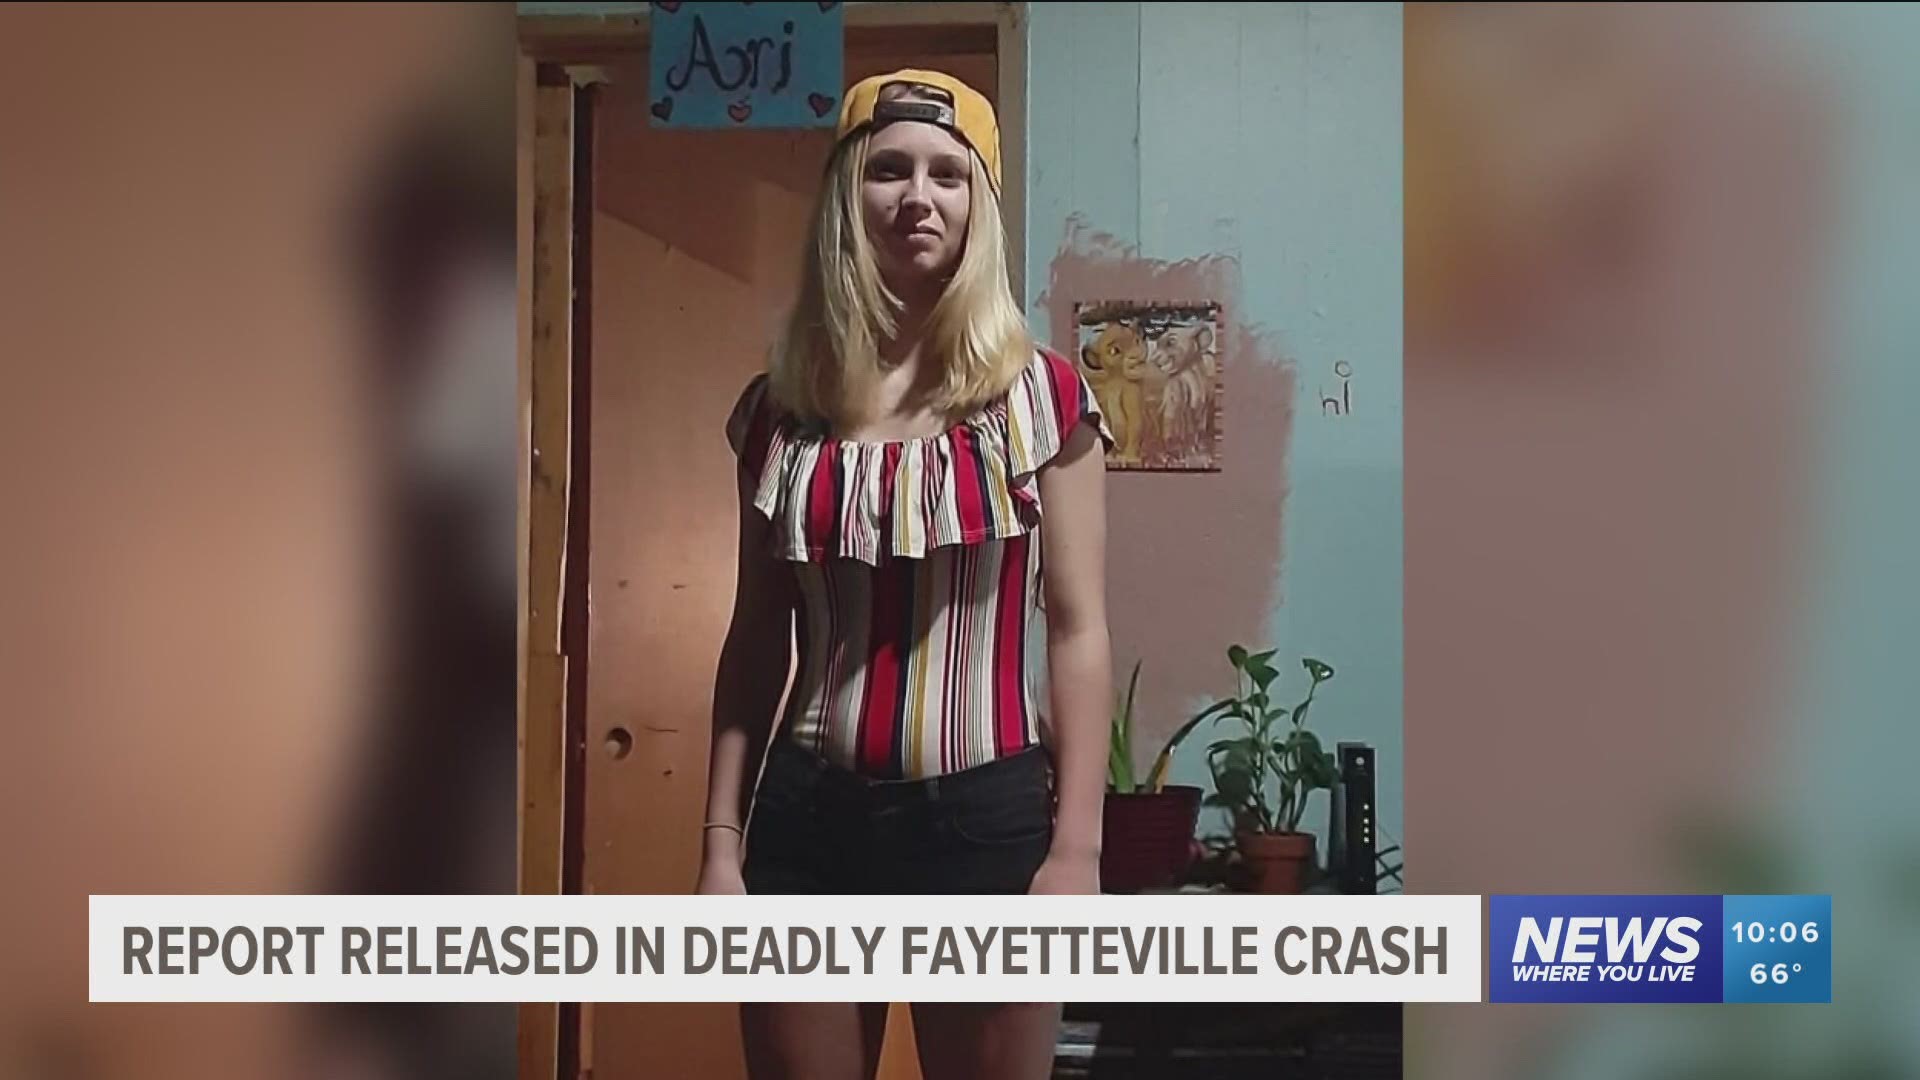 Accident report released in deadly Fayetteville scooter crash